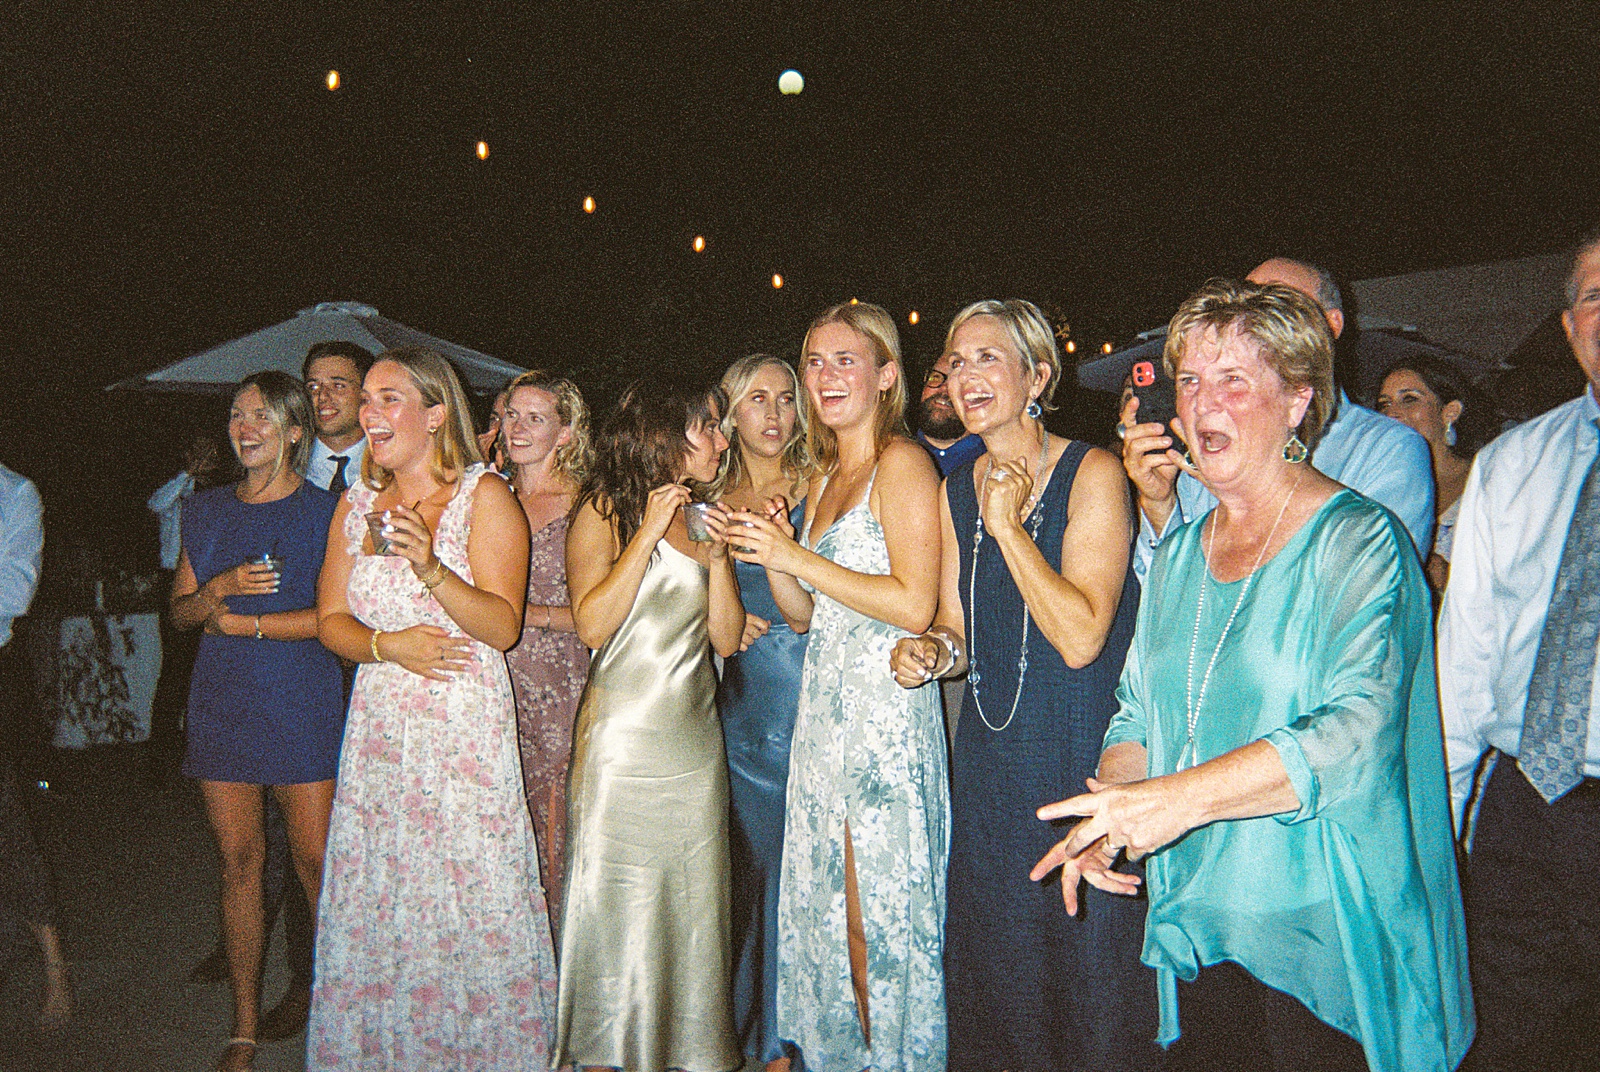 Film pictures of guests enojying dancing at wedding reception